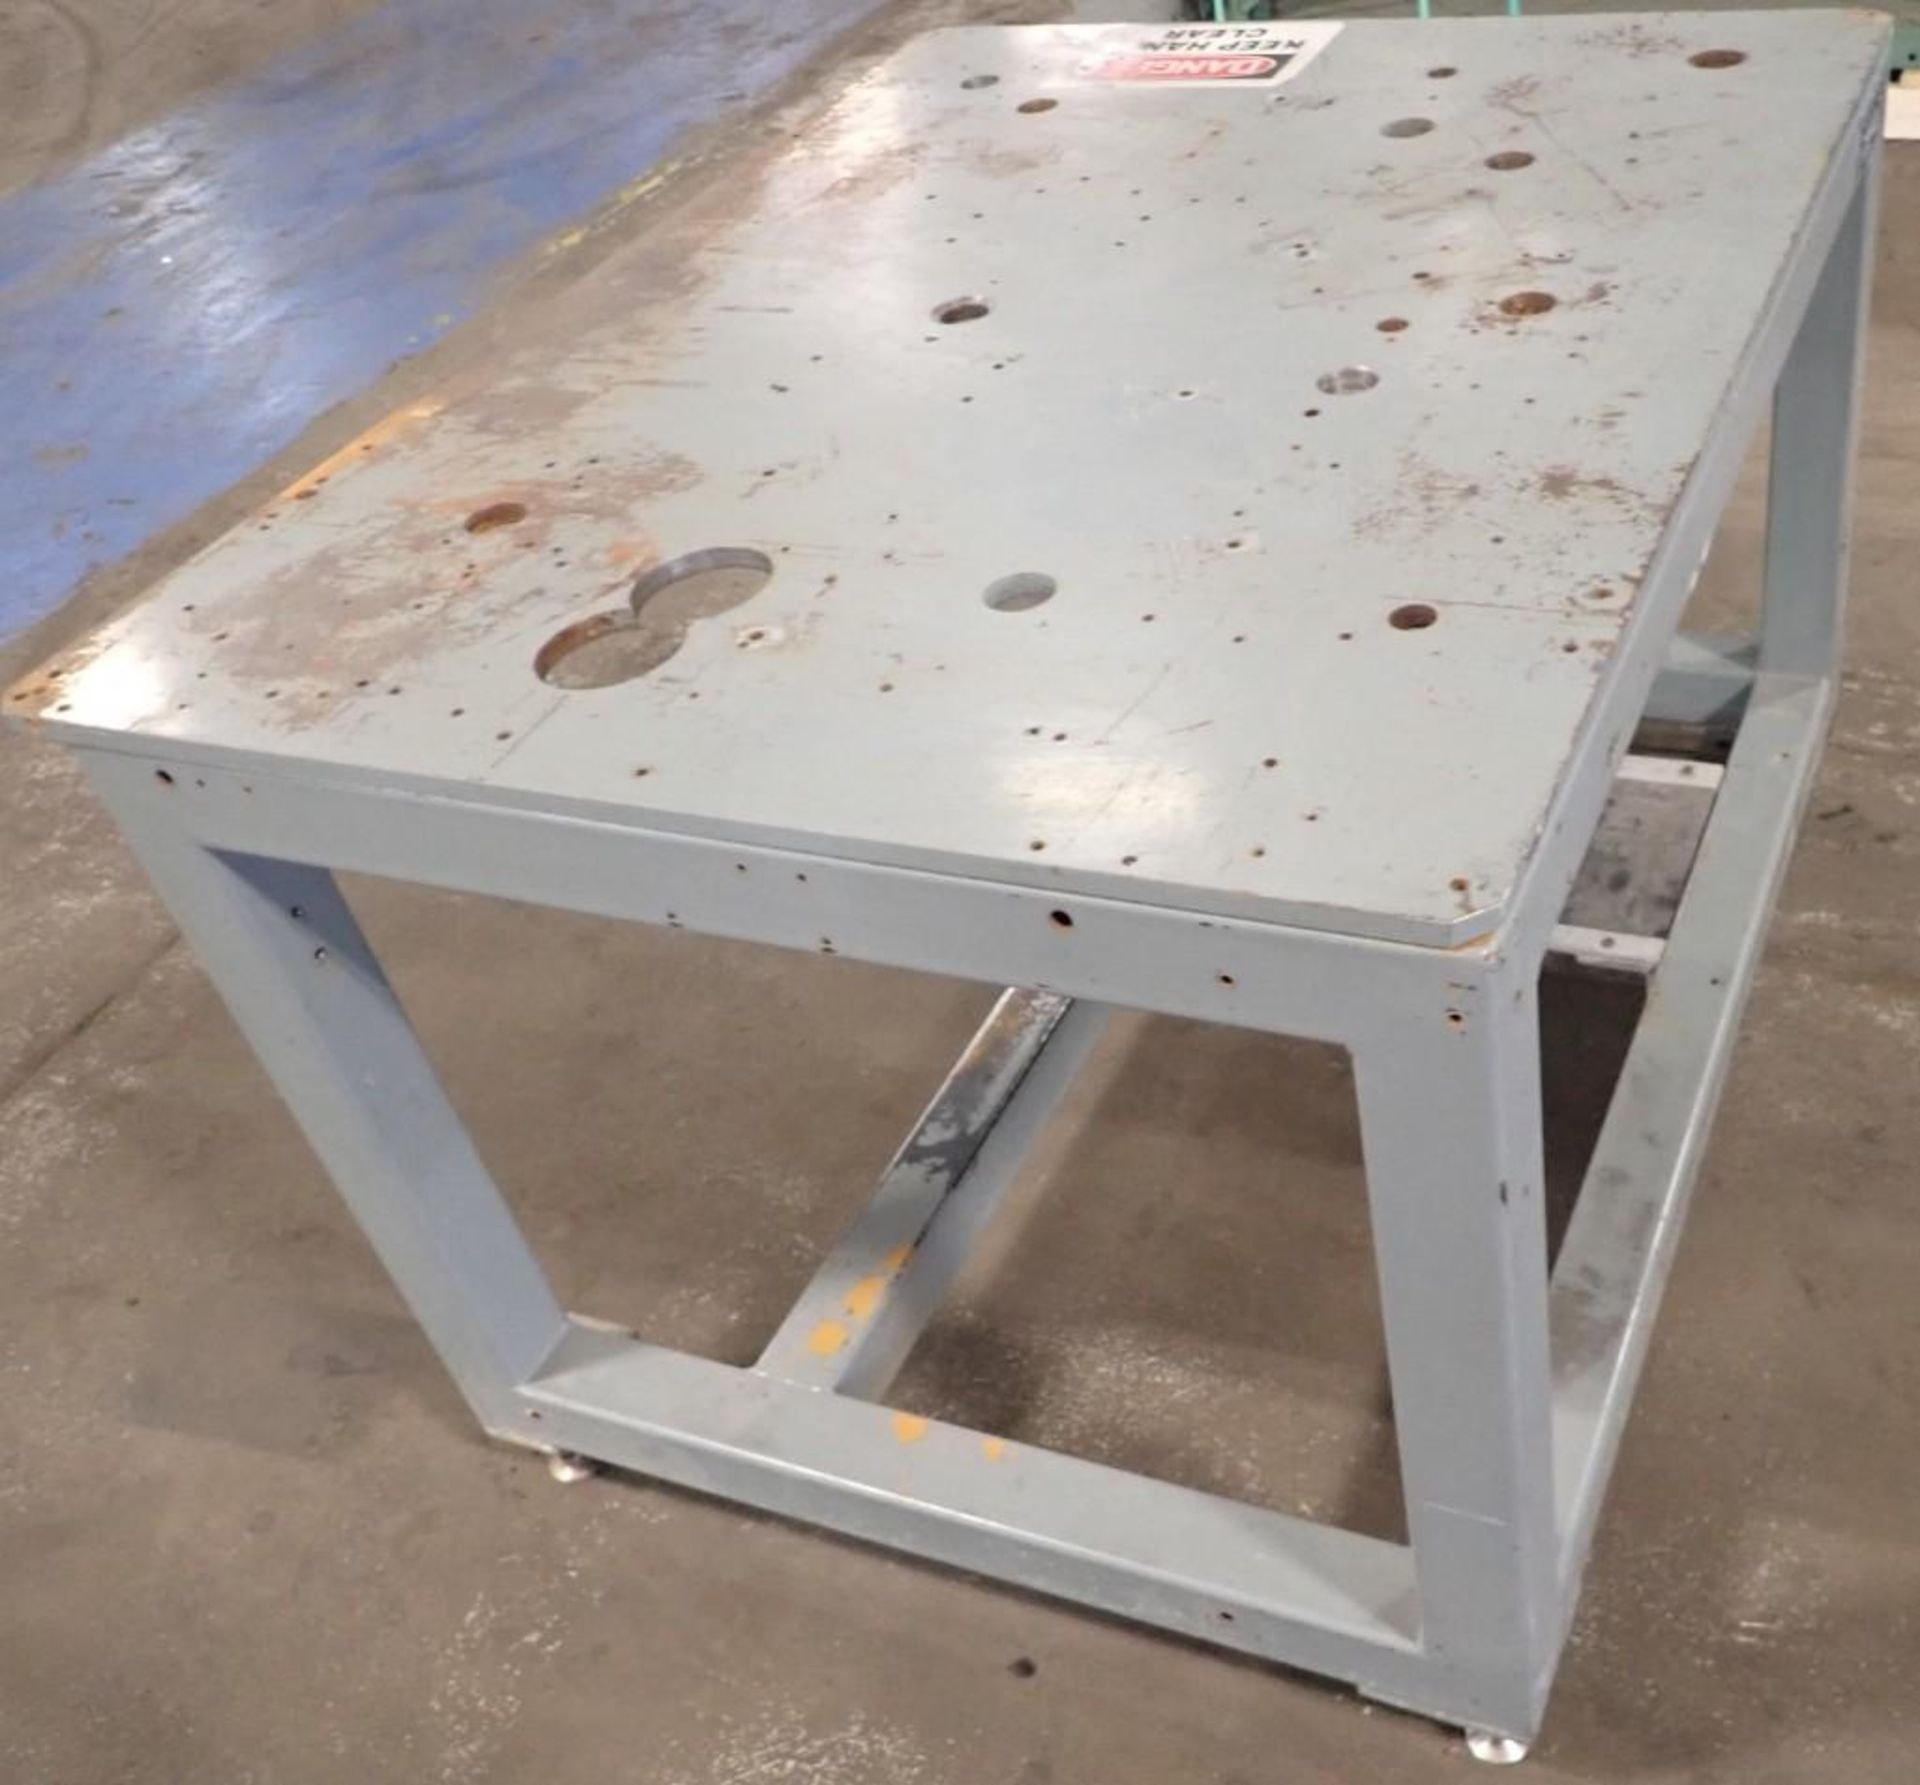 35" x 50" Steel Layout / Welding Table - Image 2 of 4